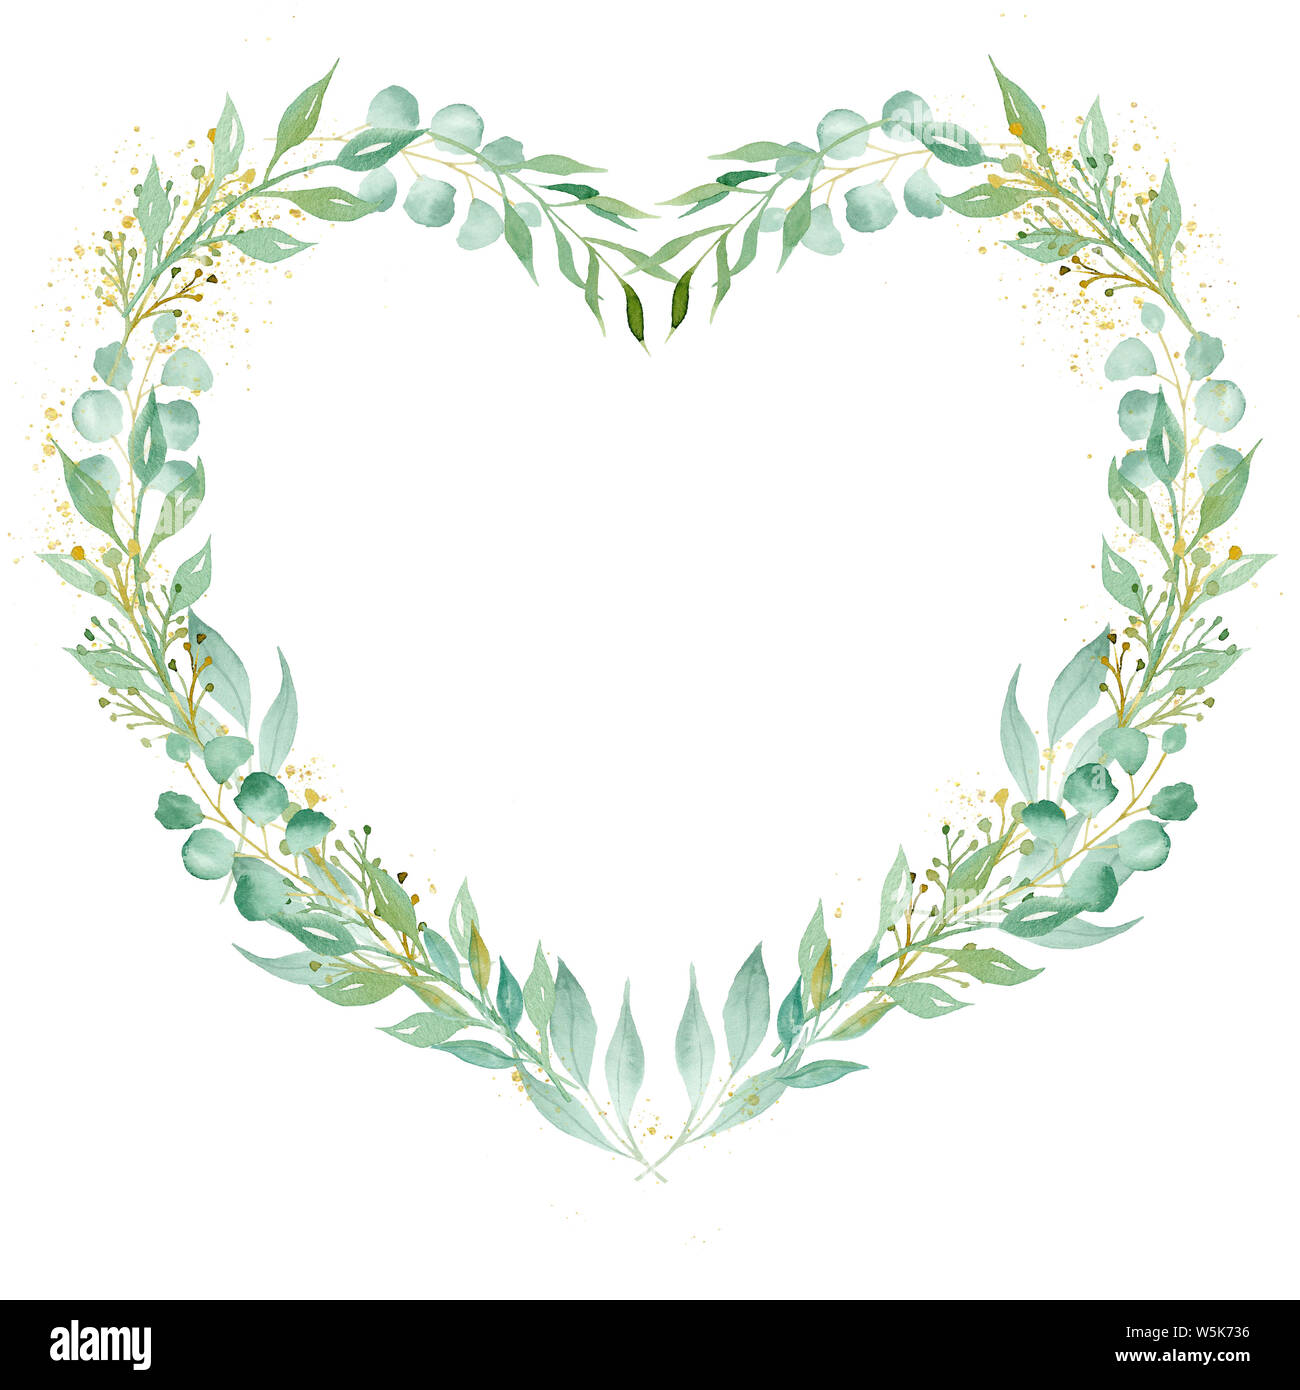 Watercolor Botanical Heart Frame Clipart Graphic by